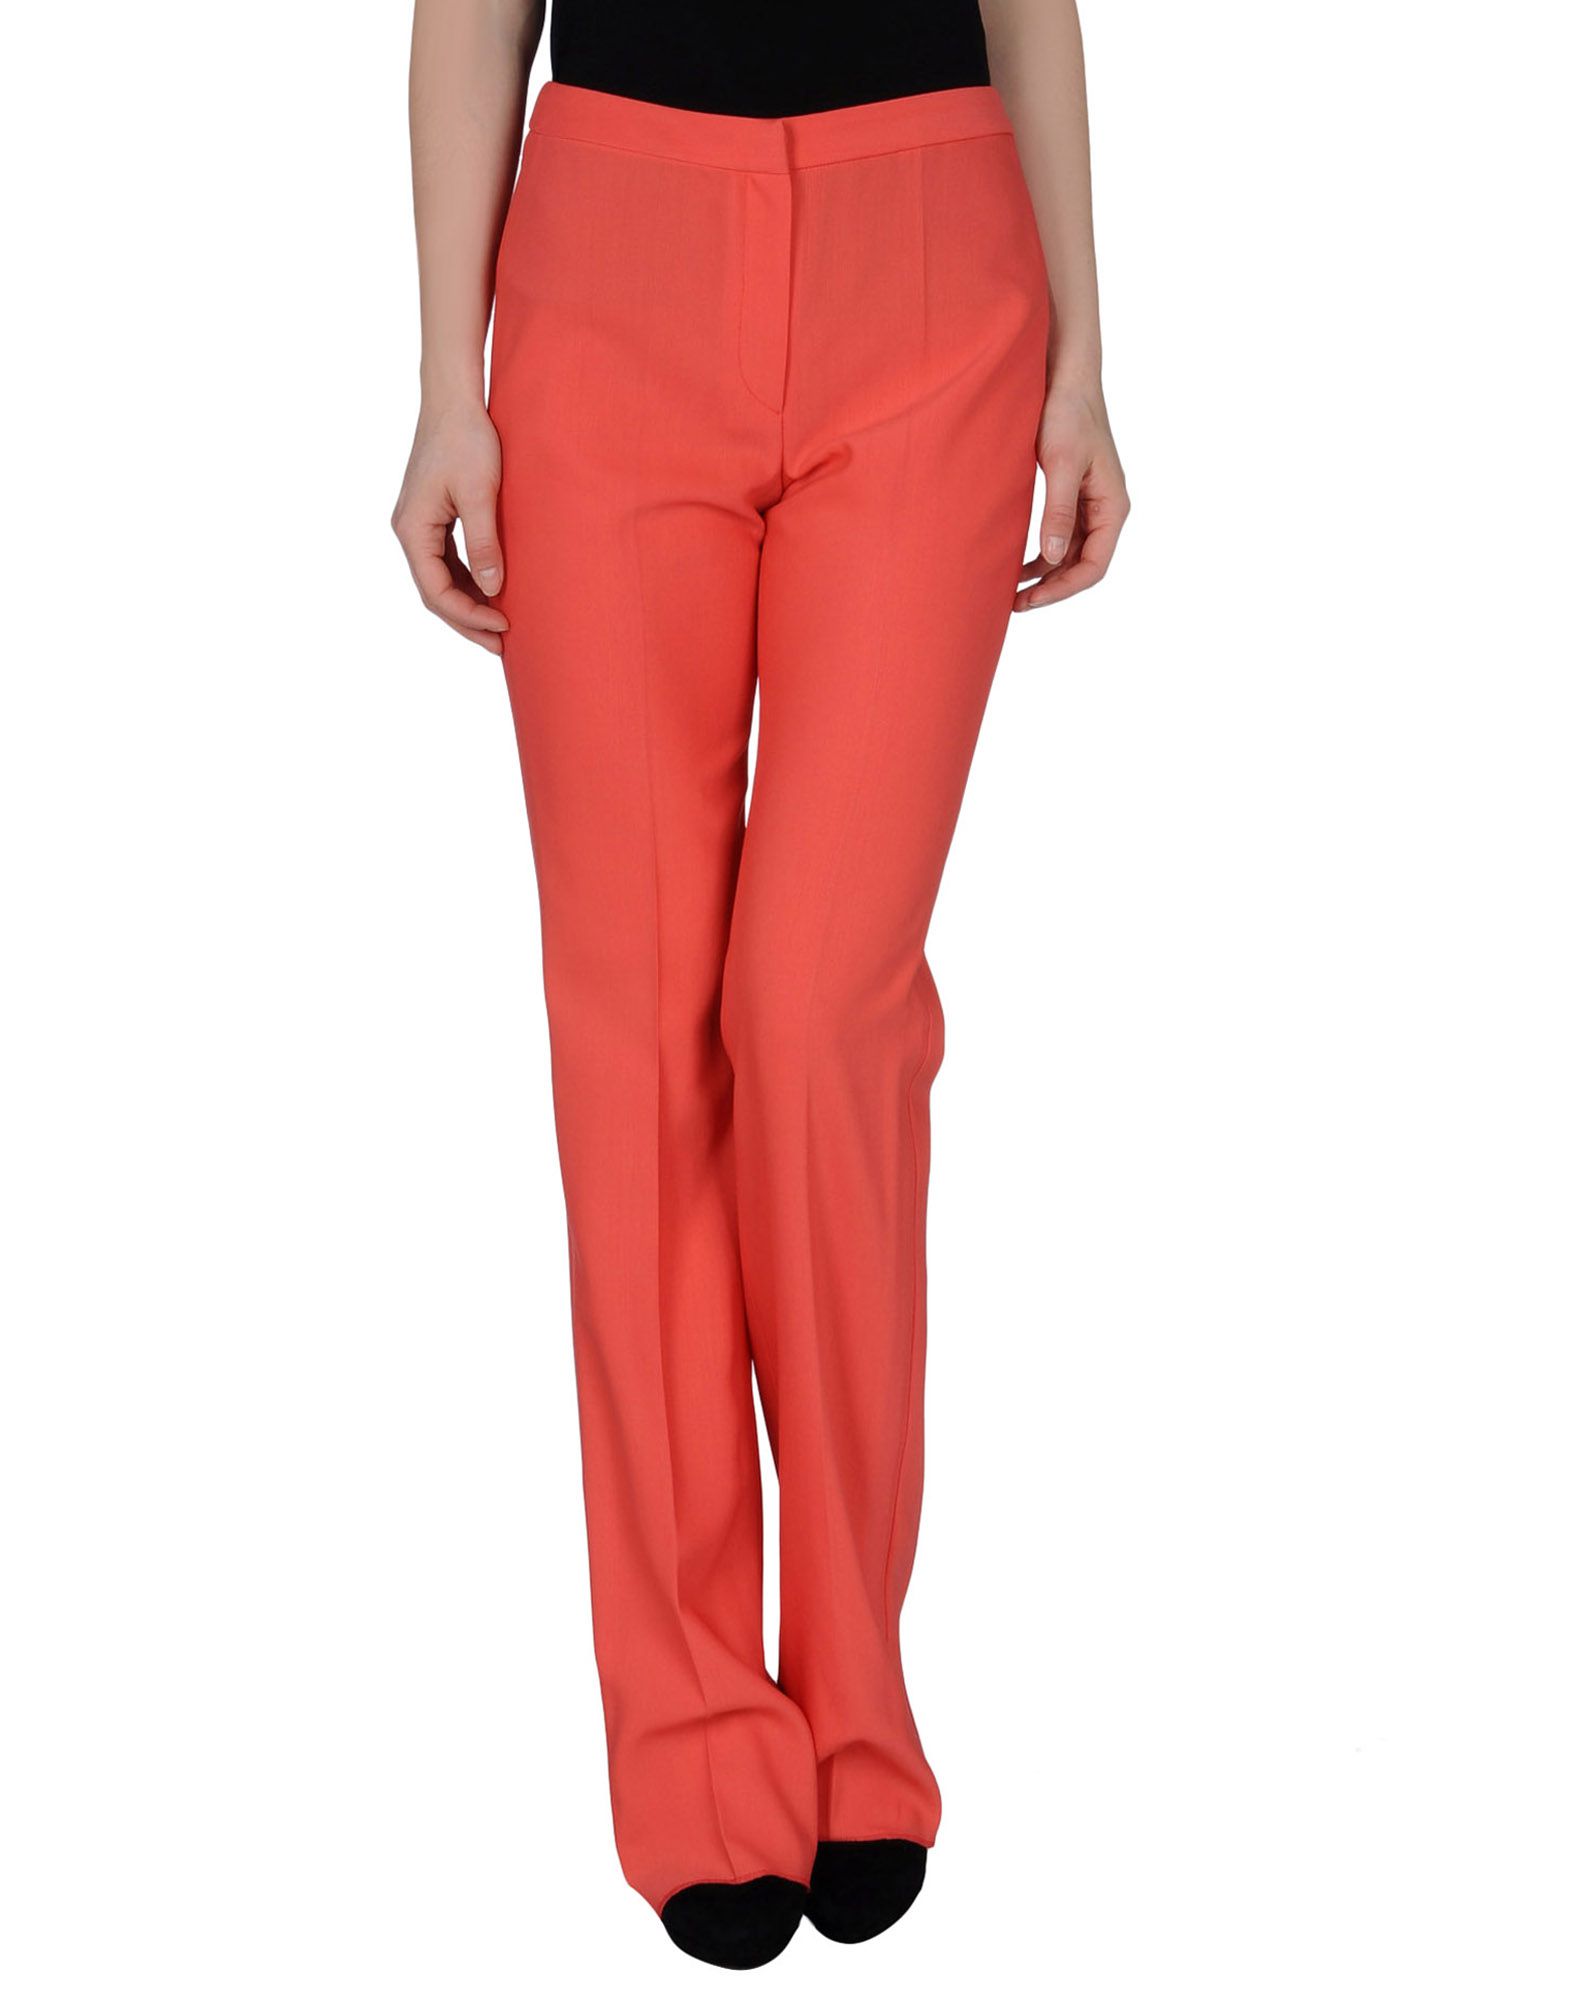 Foto Gianni Versace Couture Pantalones Mujer Coral